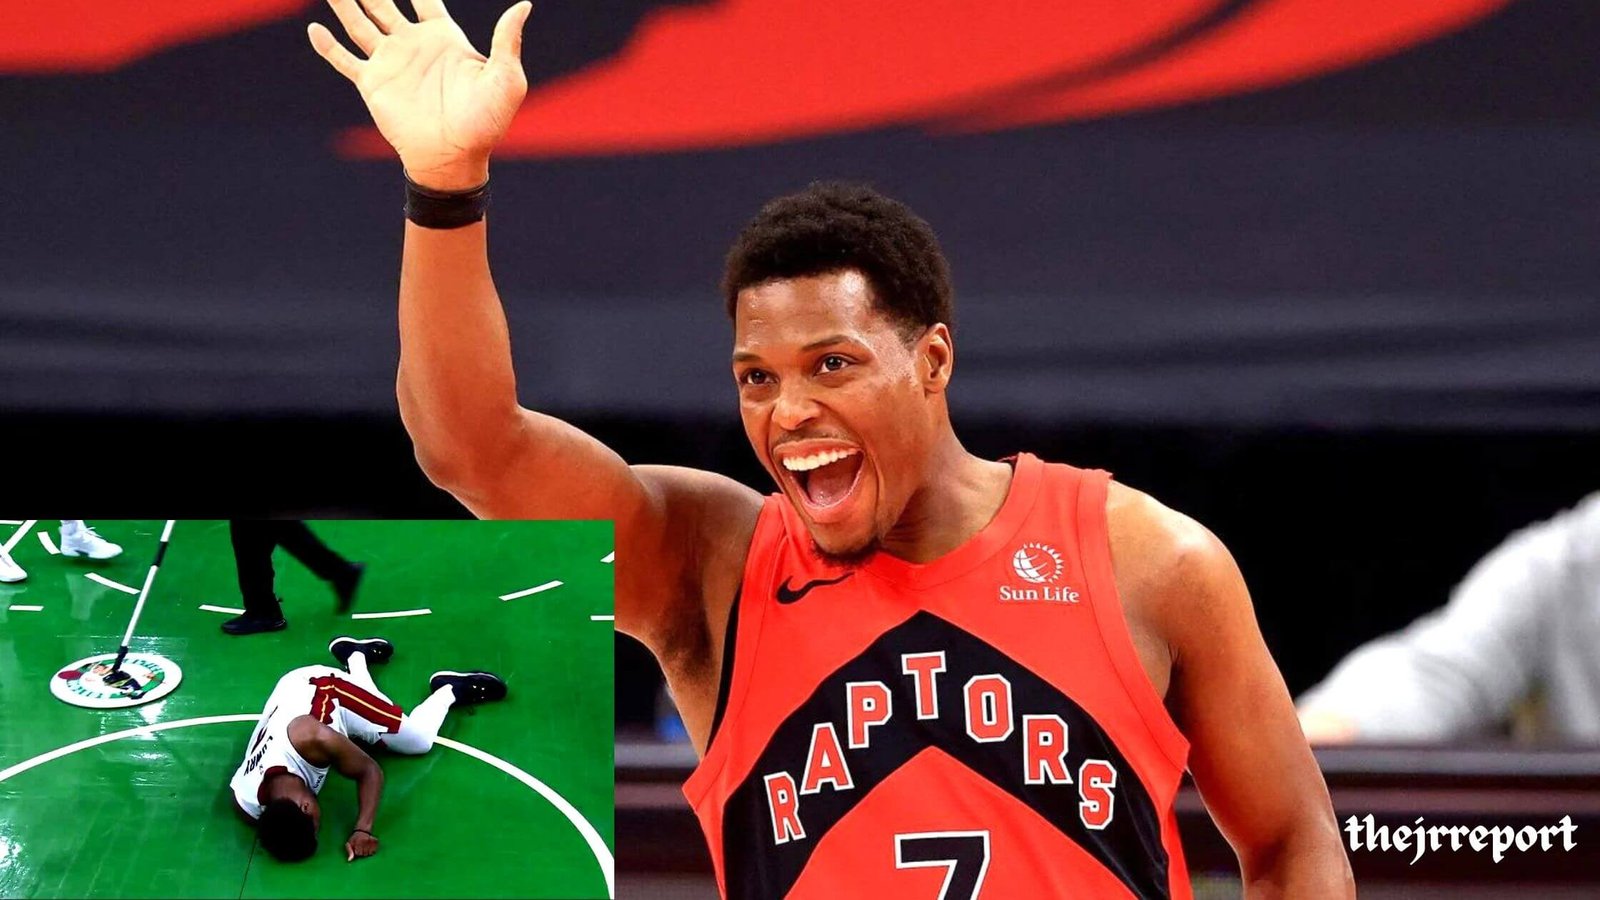 Celtics Mop Guy Savagely Wiped Floor As Kyle Lowry Was Lying Hurt